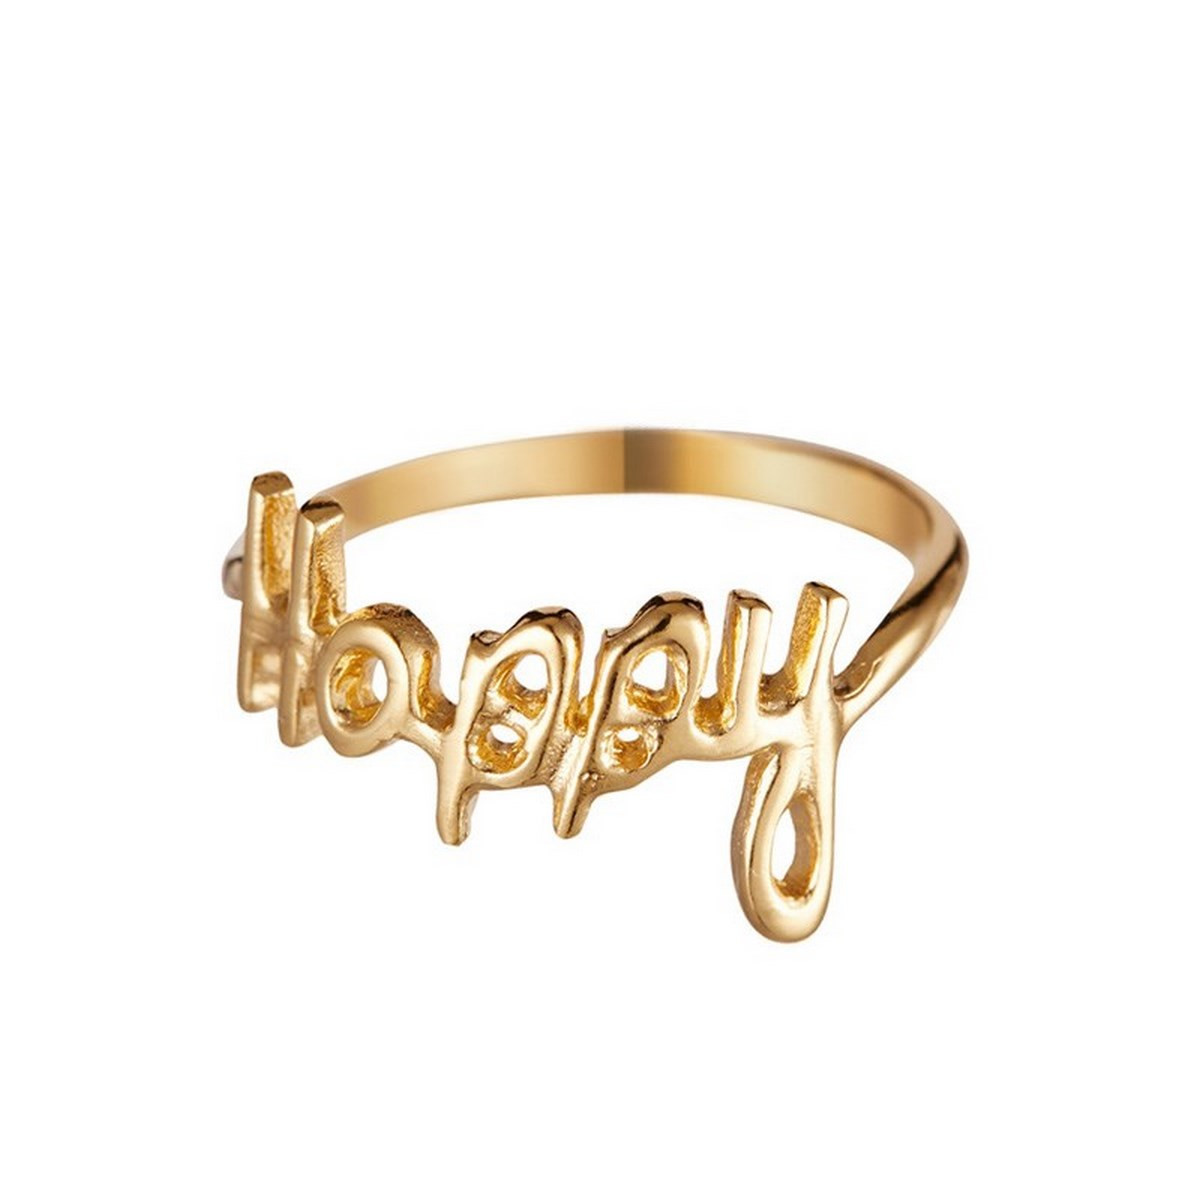 Bague dorée "Happiness in the air"